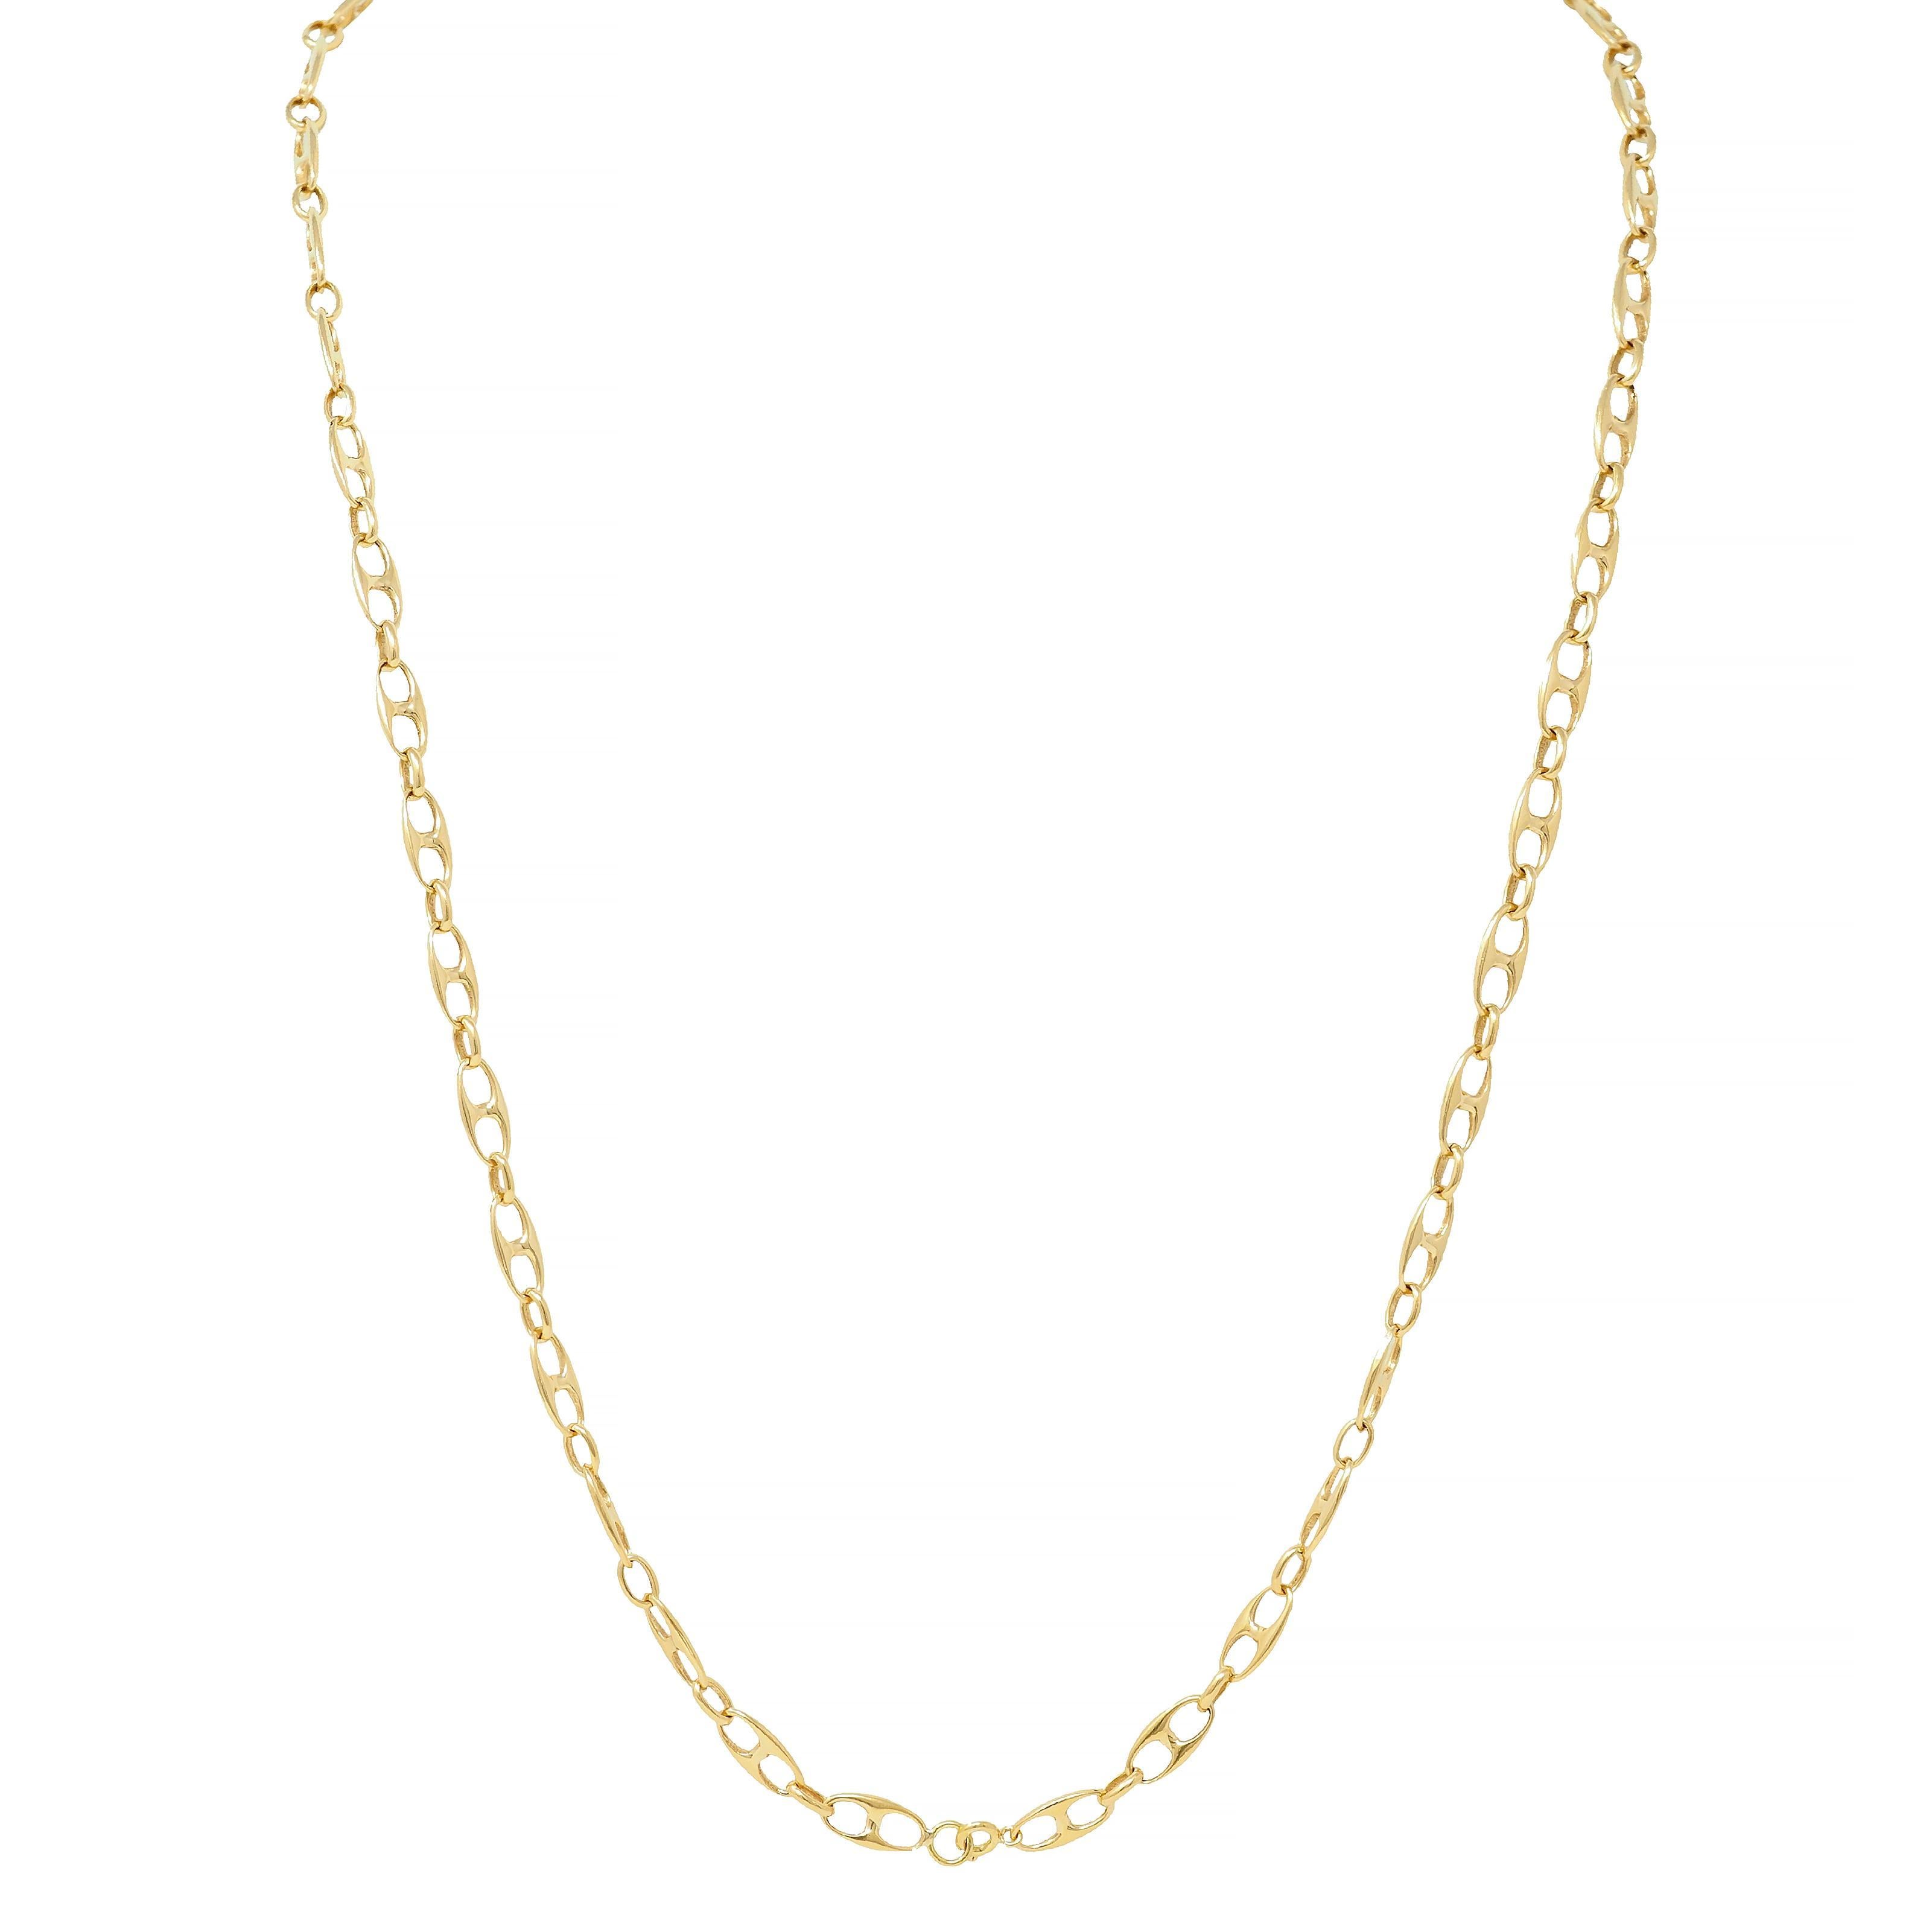 Vintage 18 Karat Yellow Gold Fancy Mariner Link Chain Necklace For Sale 1